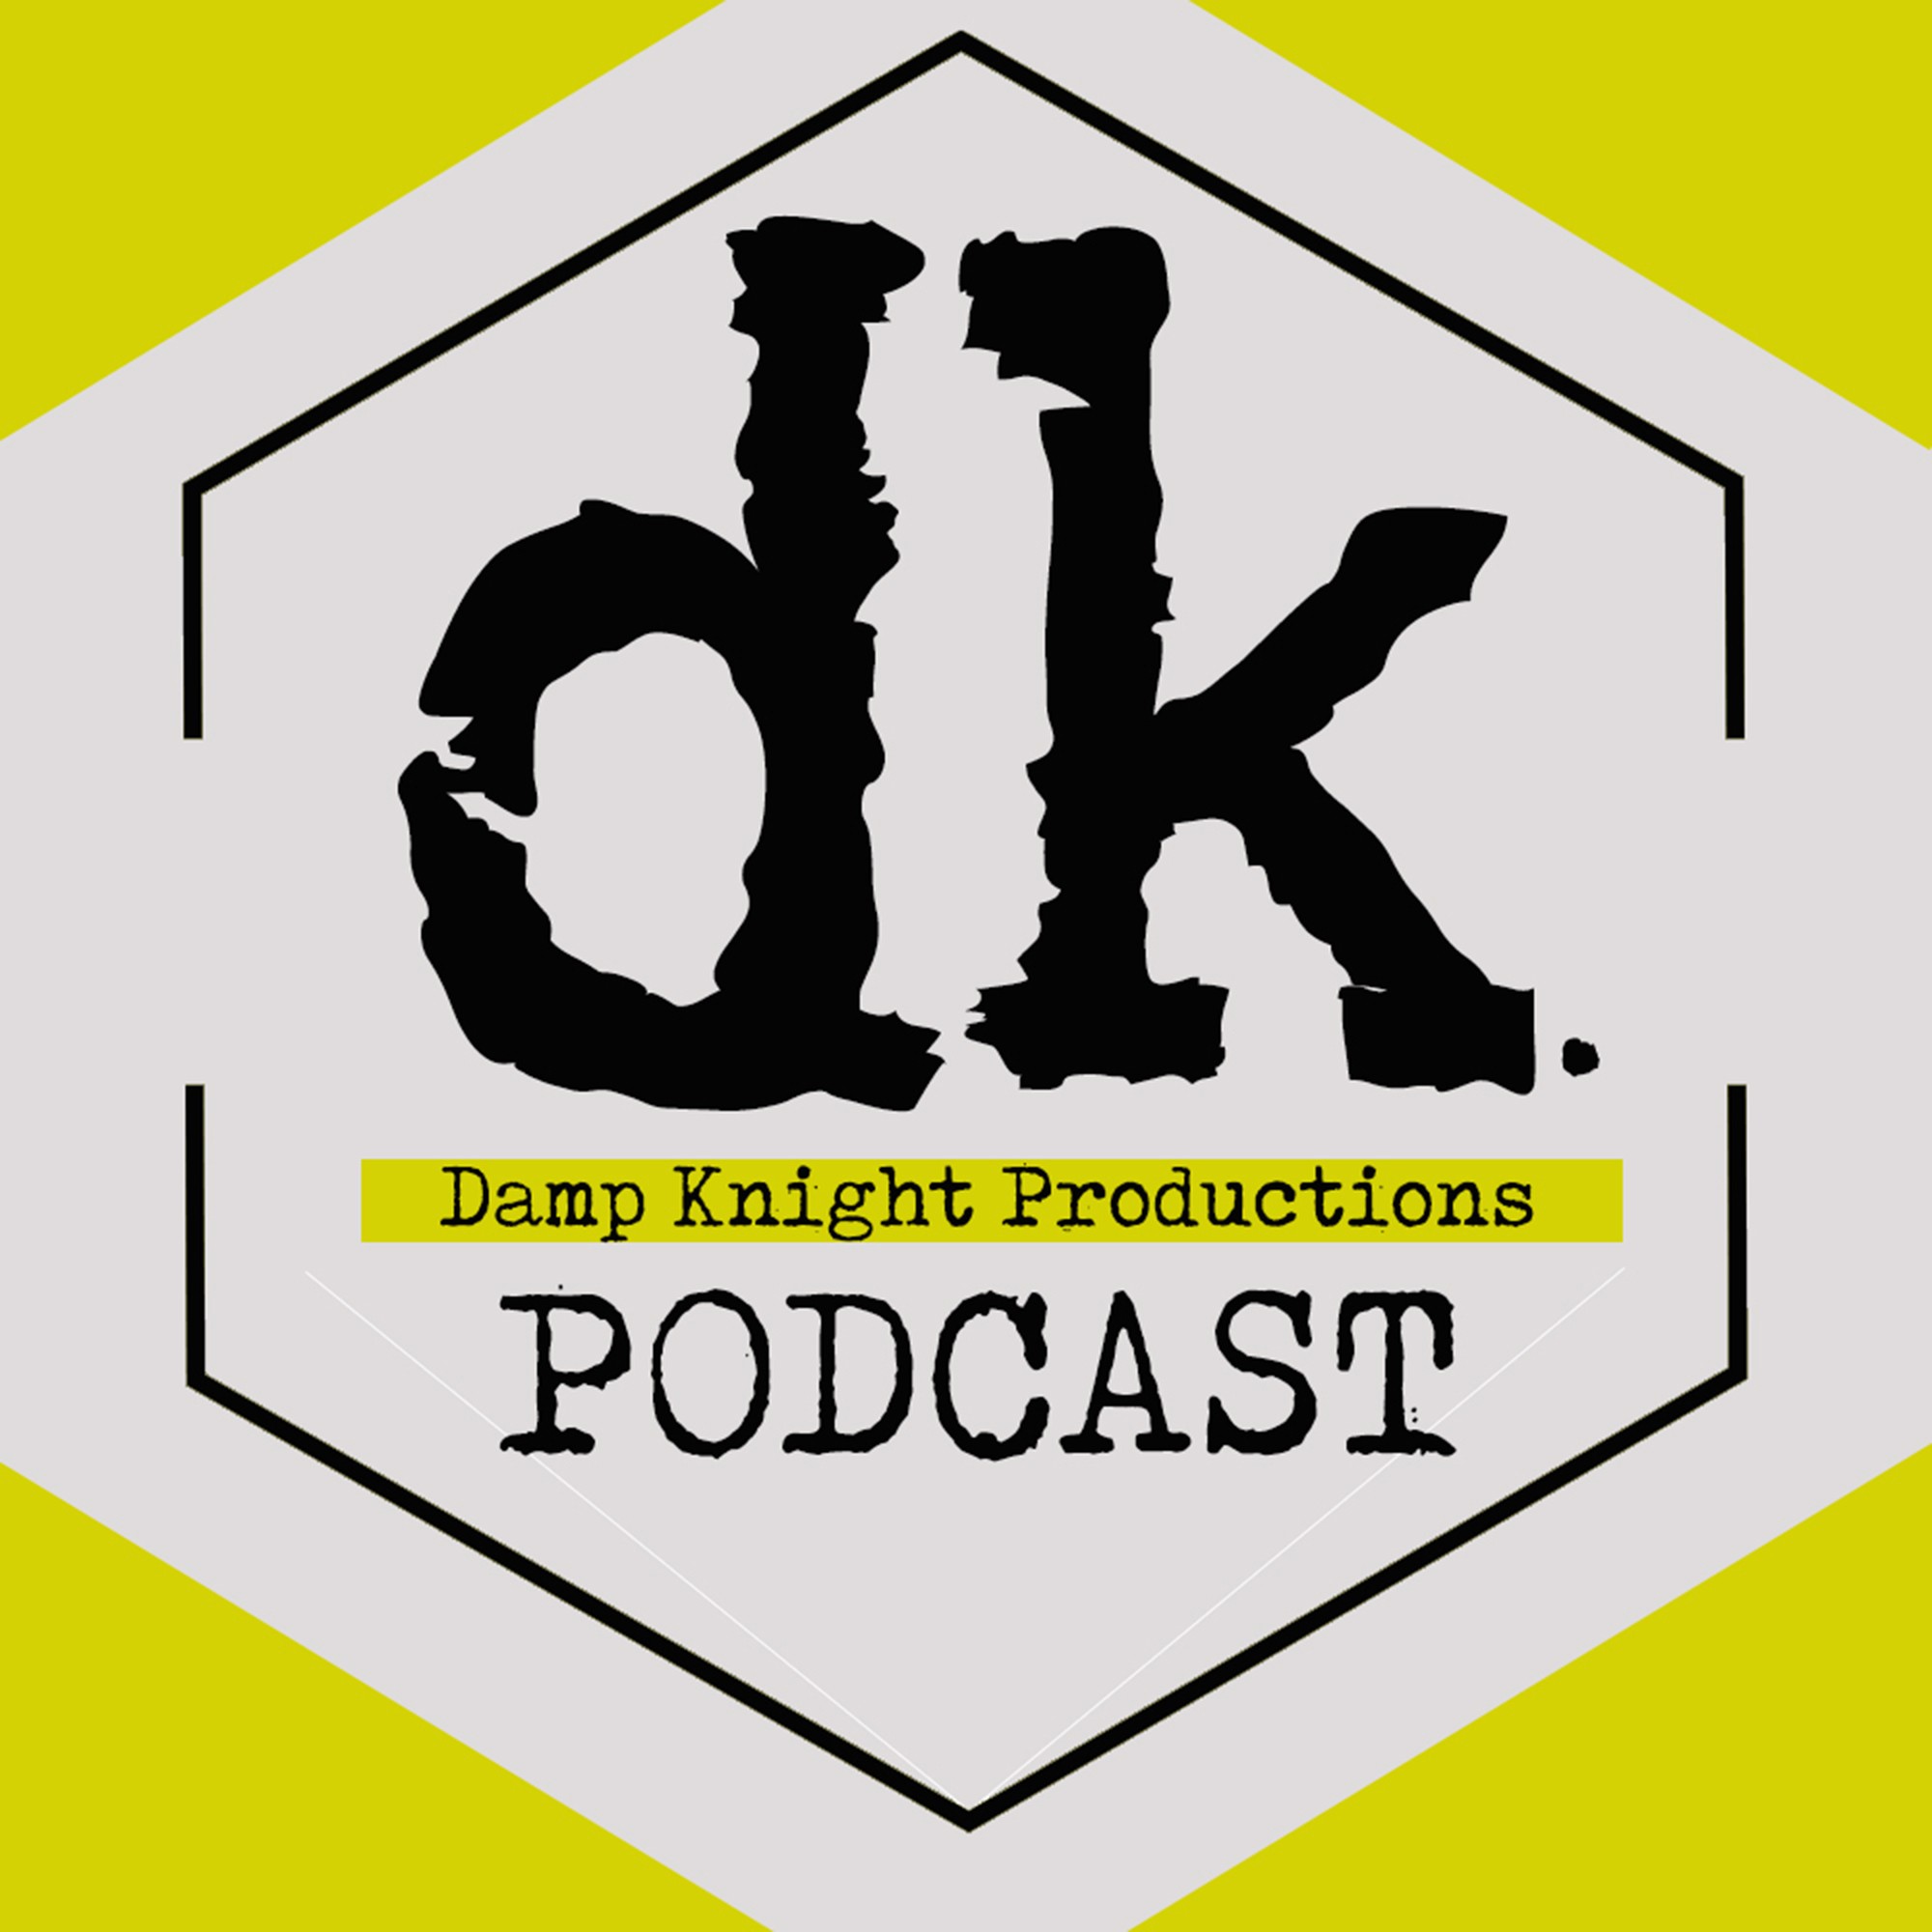 DK Podcast Ep 5 - Damp Table/A Live Audience with Damp Knight